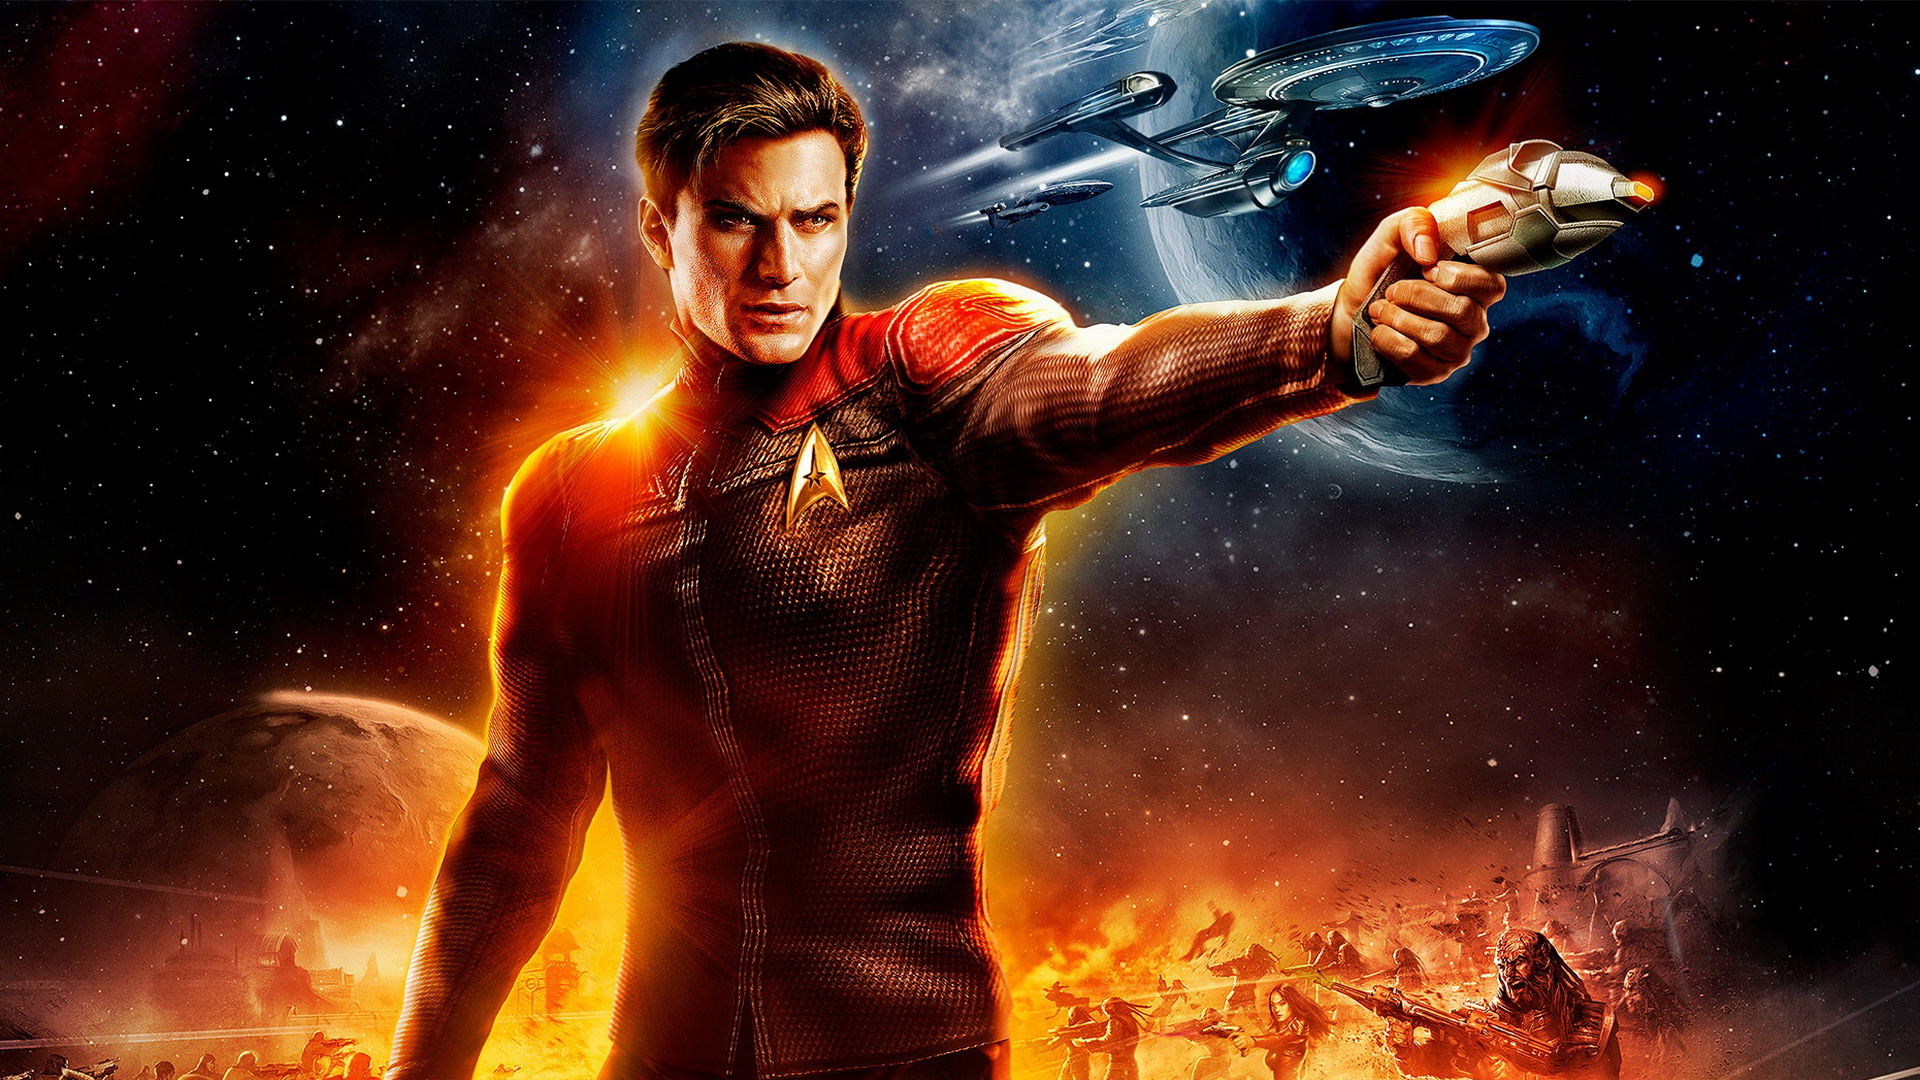 Star Trek Online Free-To-Play Goes Live